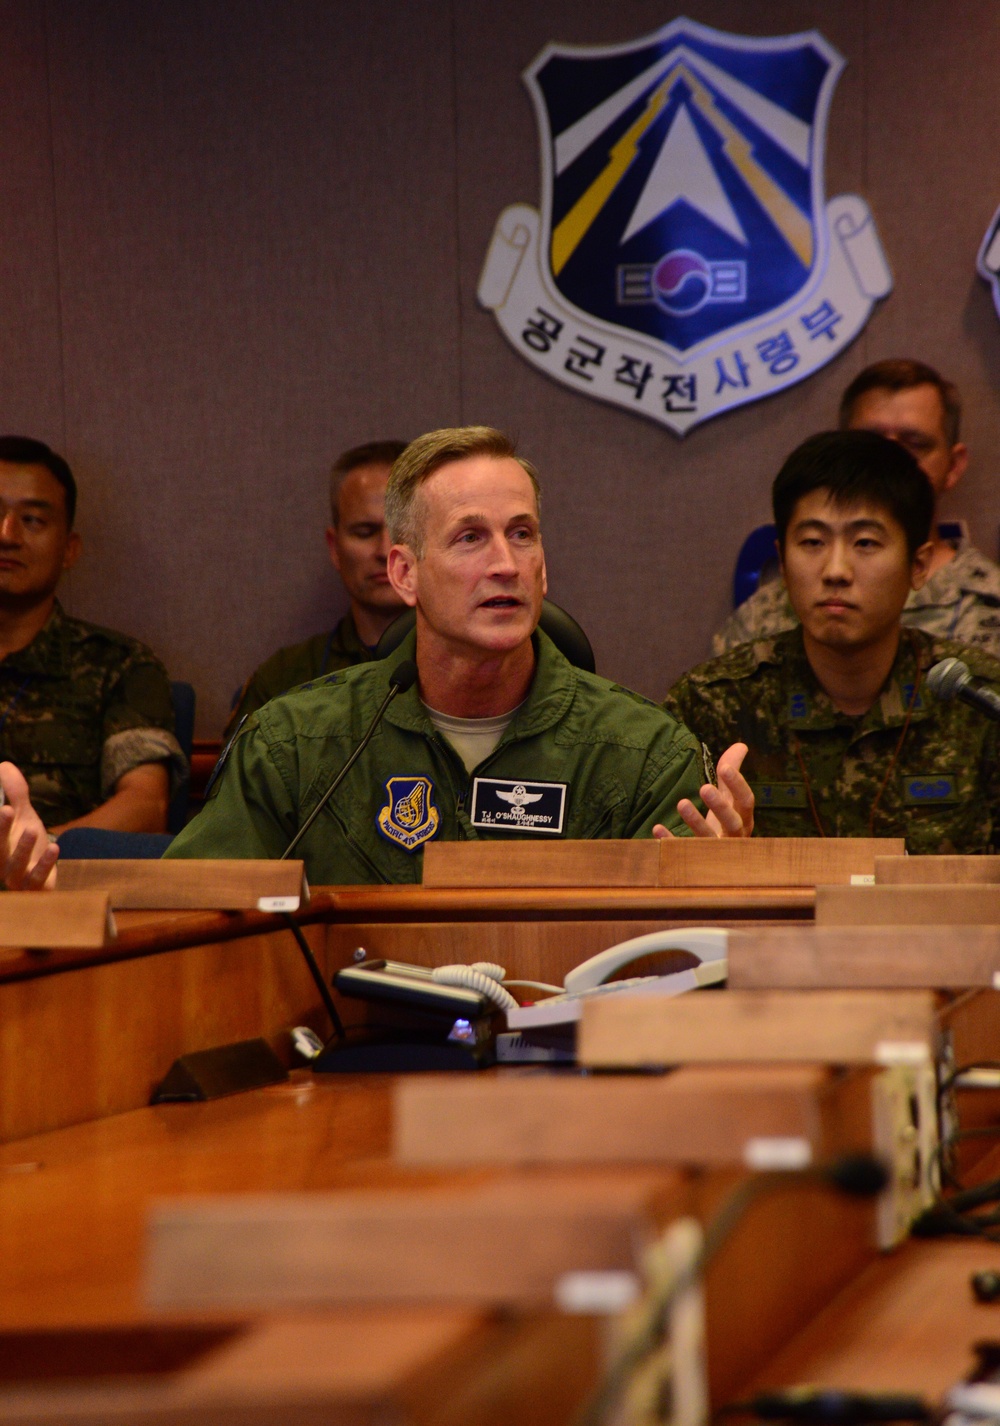 Military leaders meet during 2015 Air Boss Conference